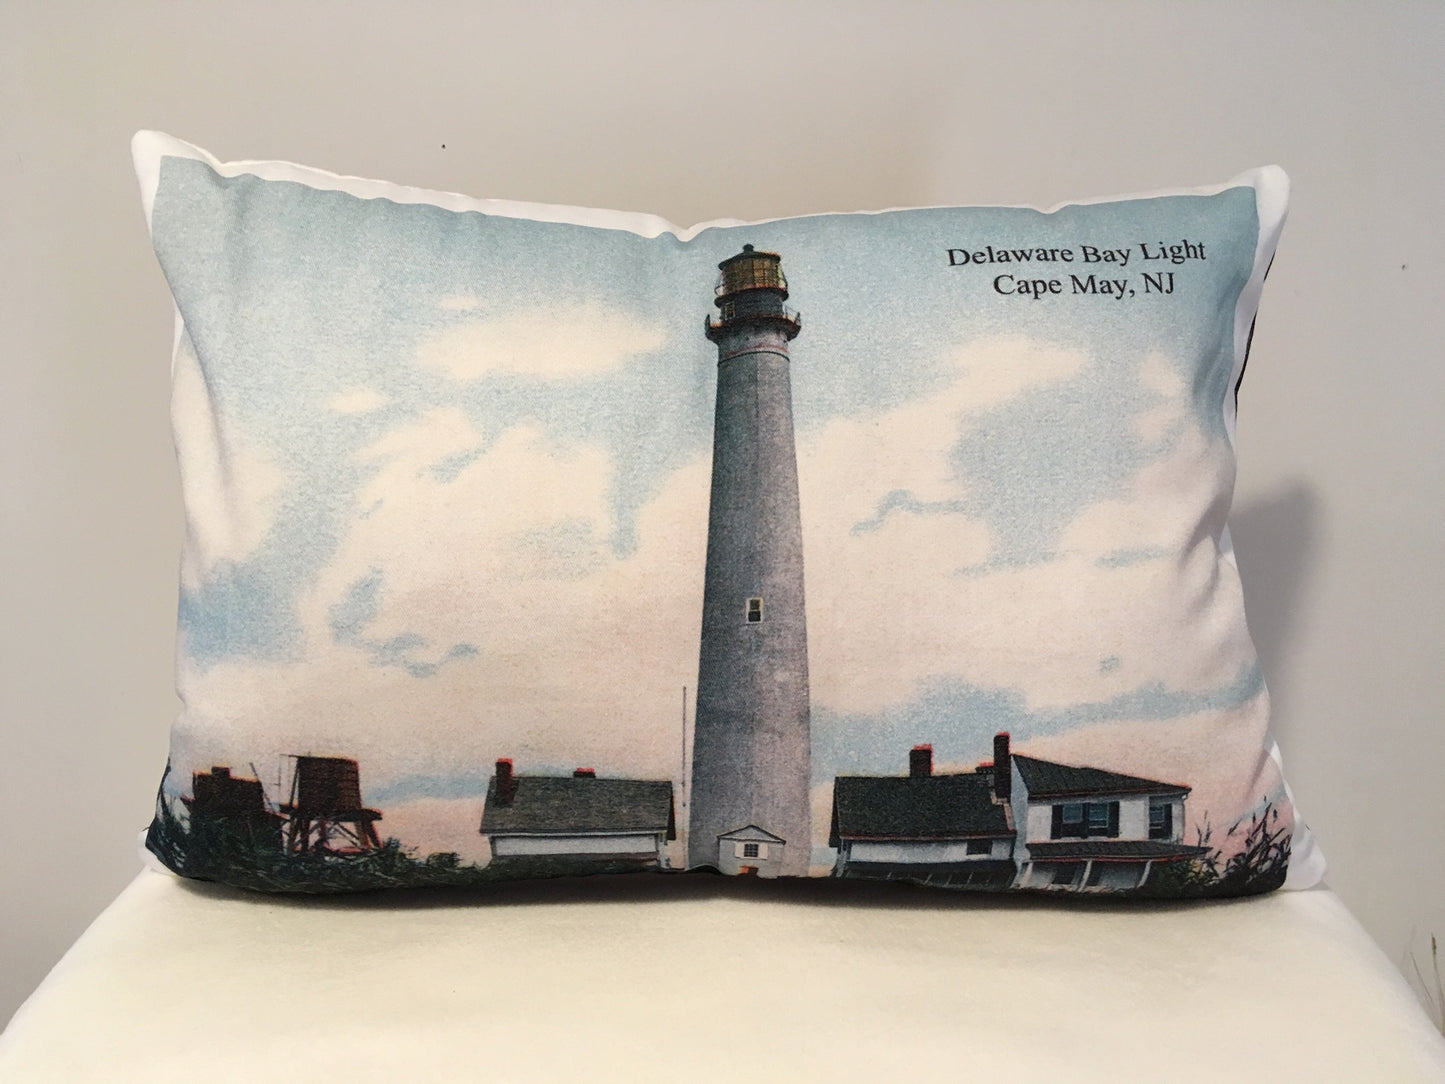 Colorful Cotton Twill Pillow Of New Jersey's Cape May Light - That Fabled Shore Home Decor